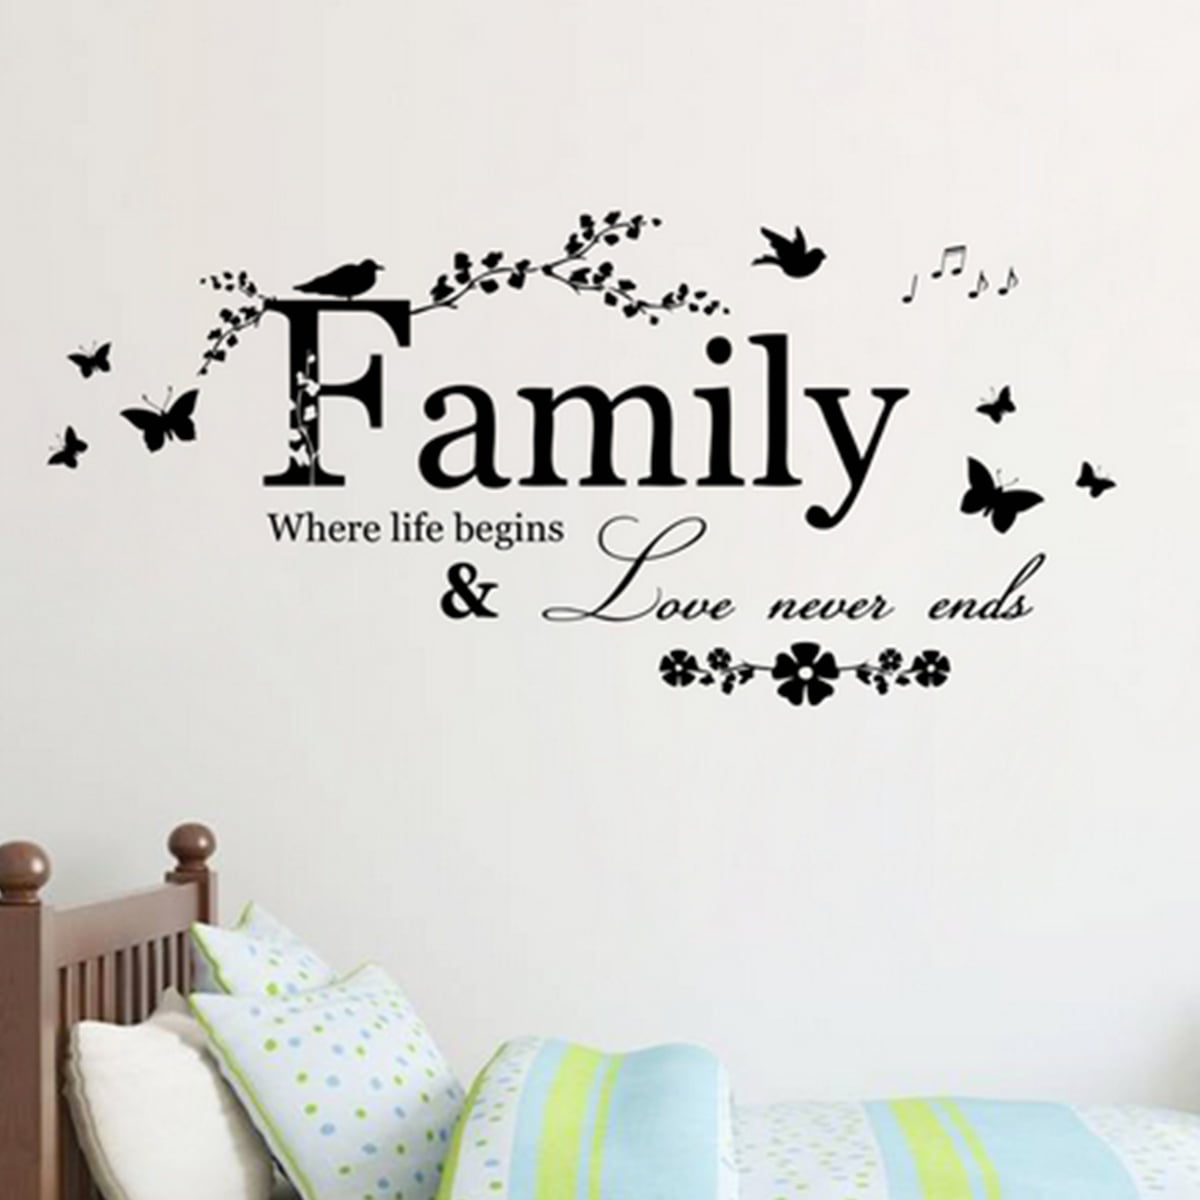 This kitchen is seasoned with love Wall Sticker Removable Vinyl Decal Art Quote